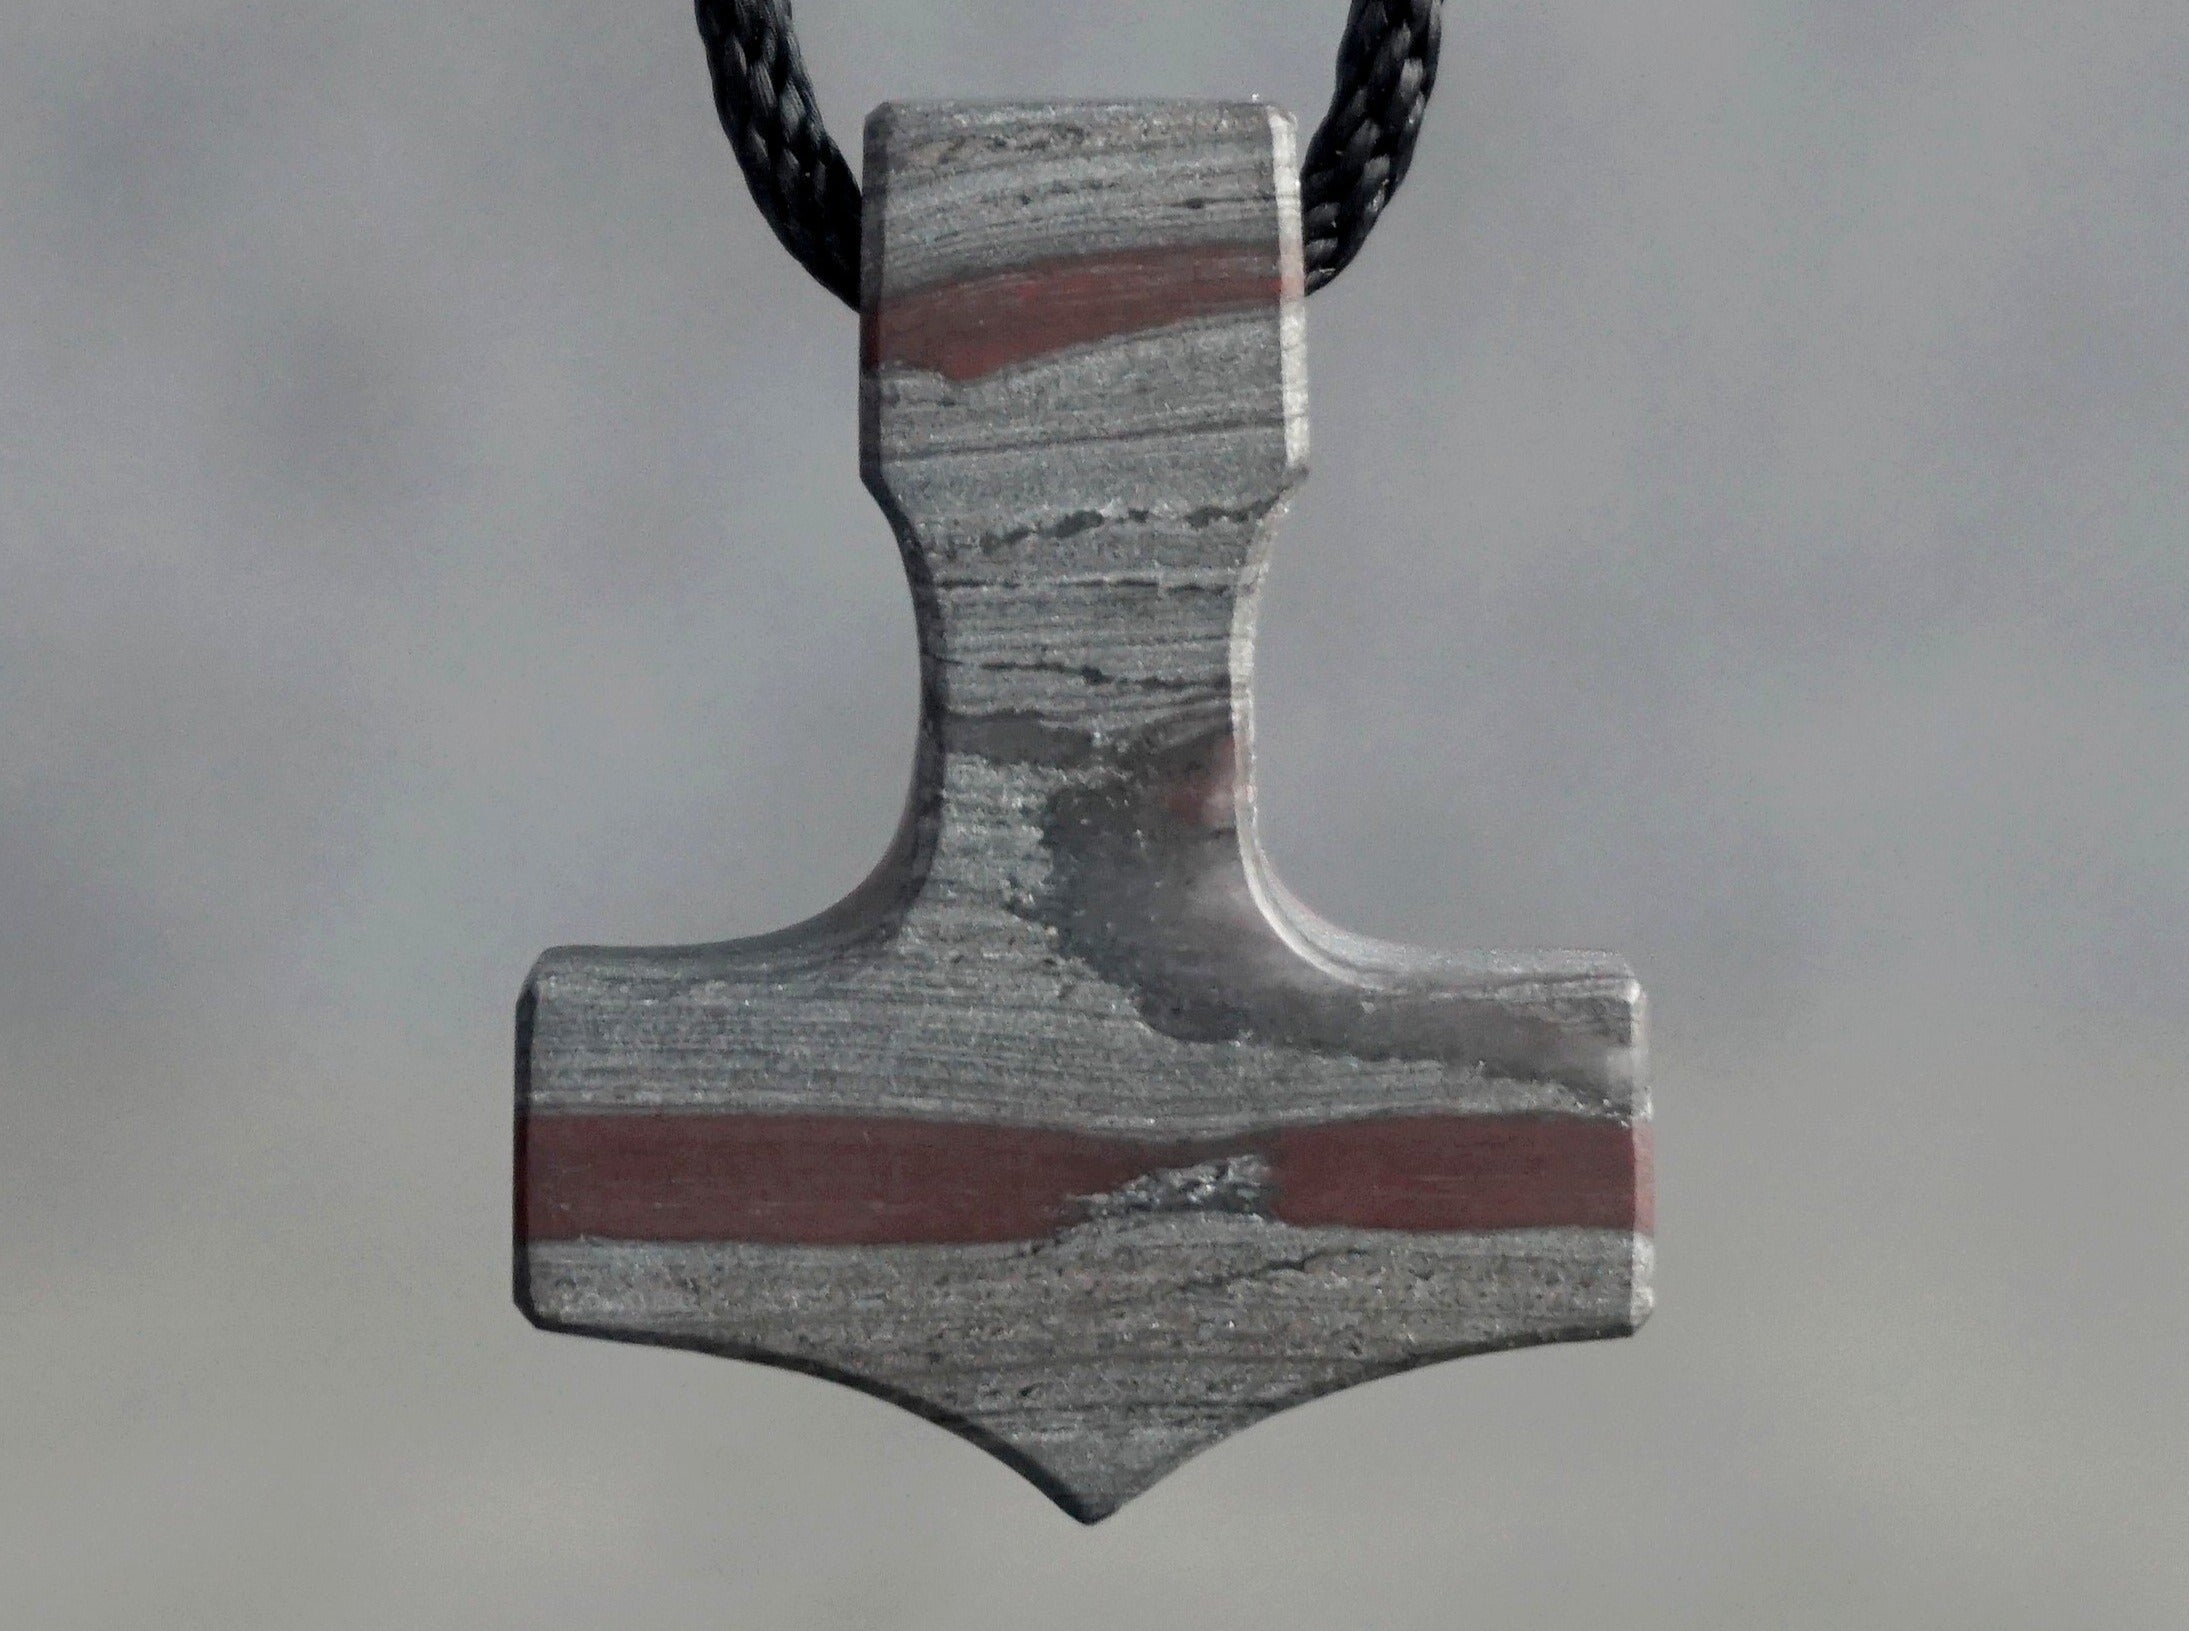 Thor's hammer amulet in grey colour with cherry-red horizontal lines